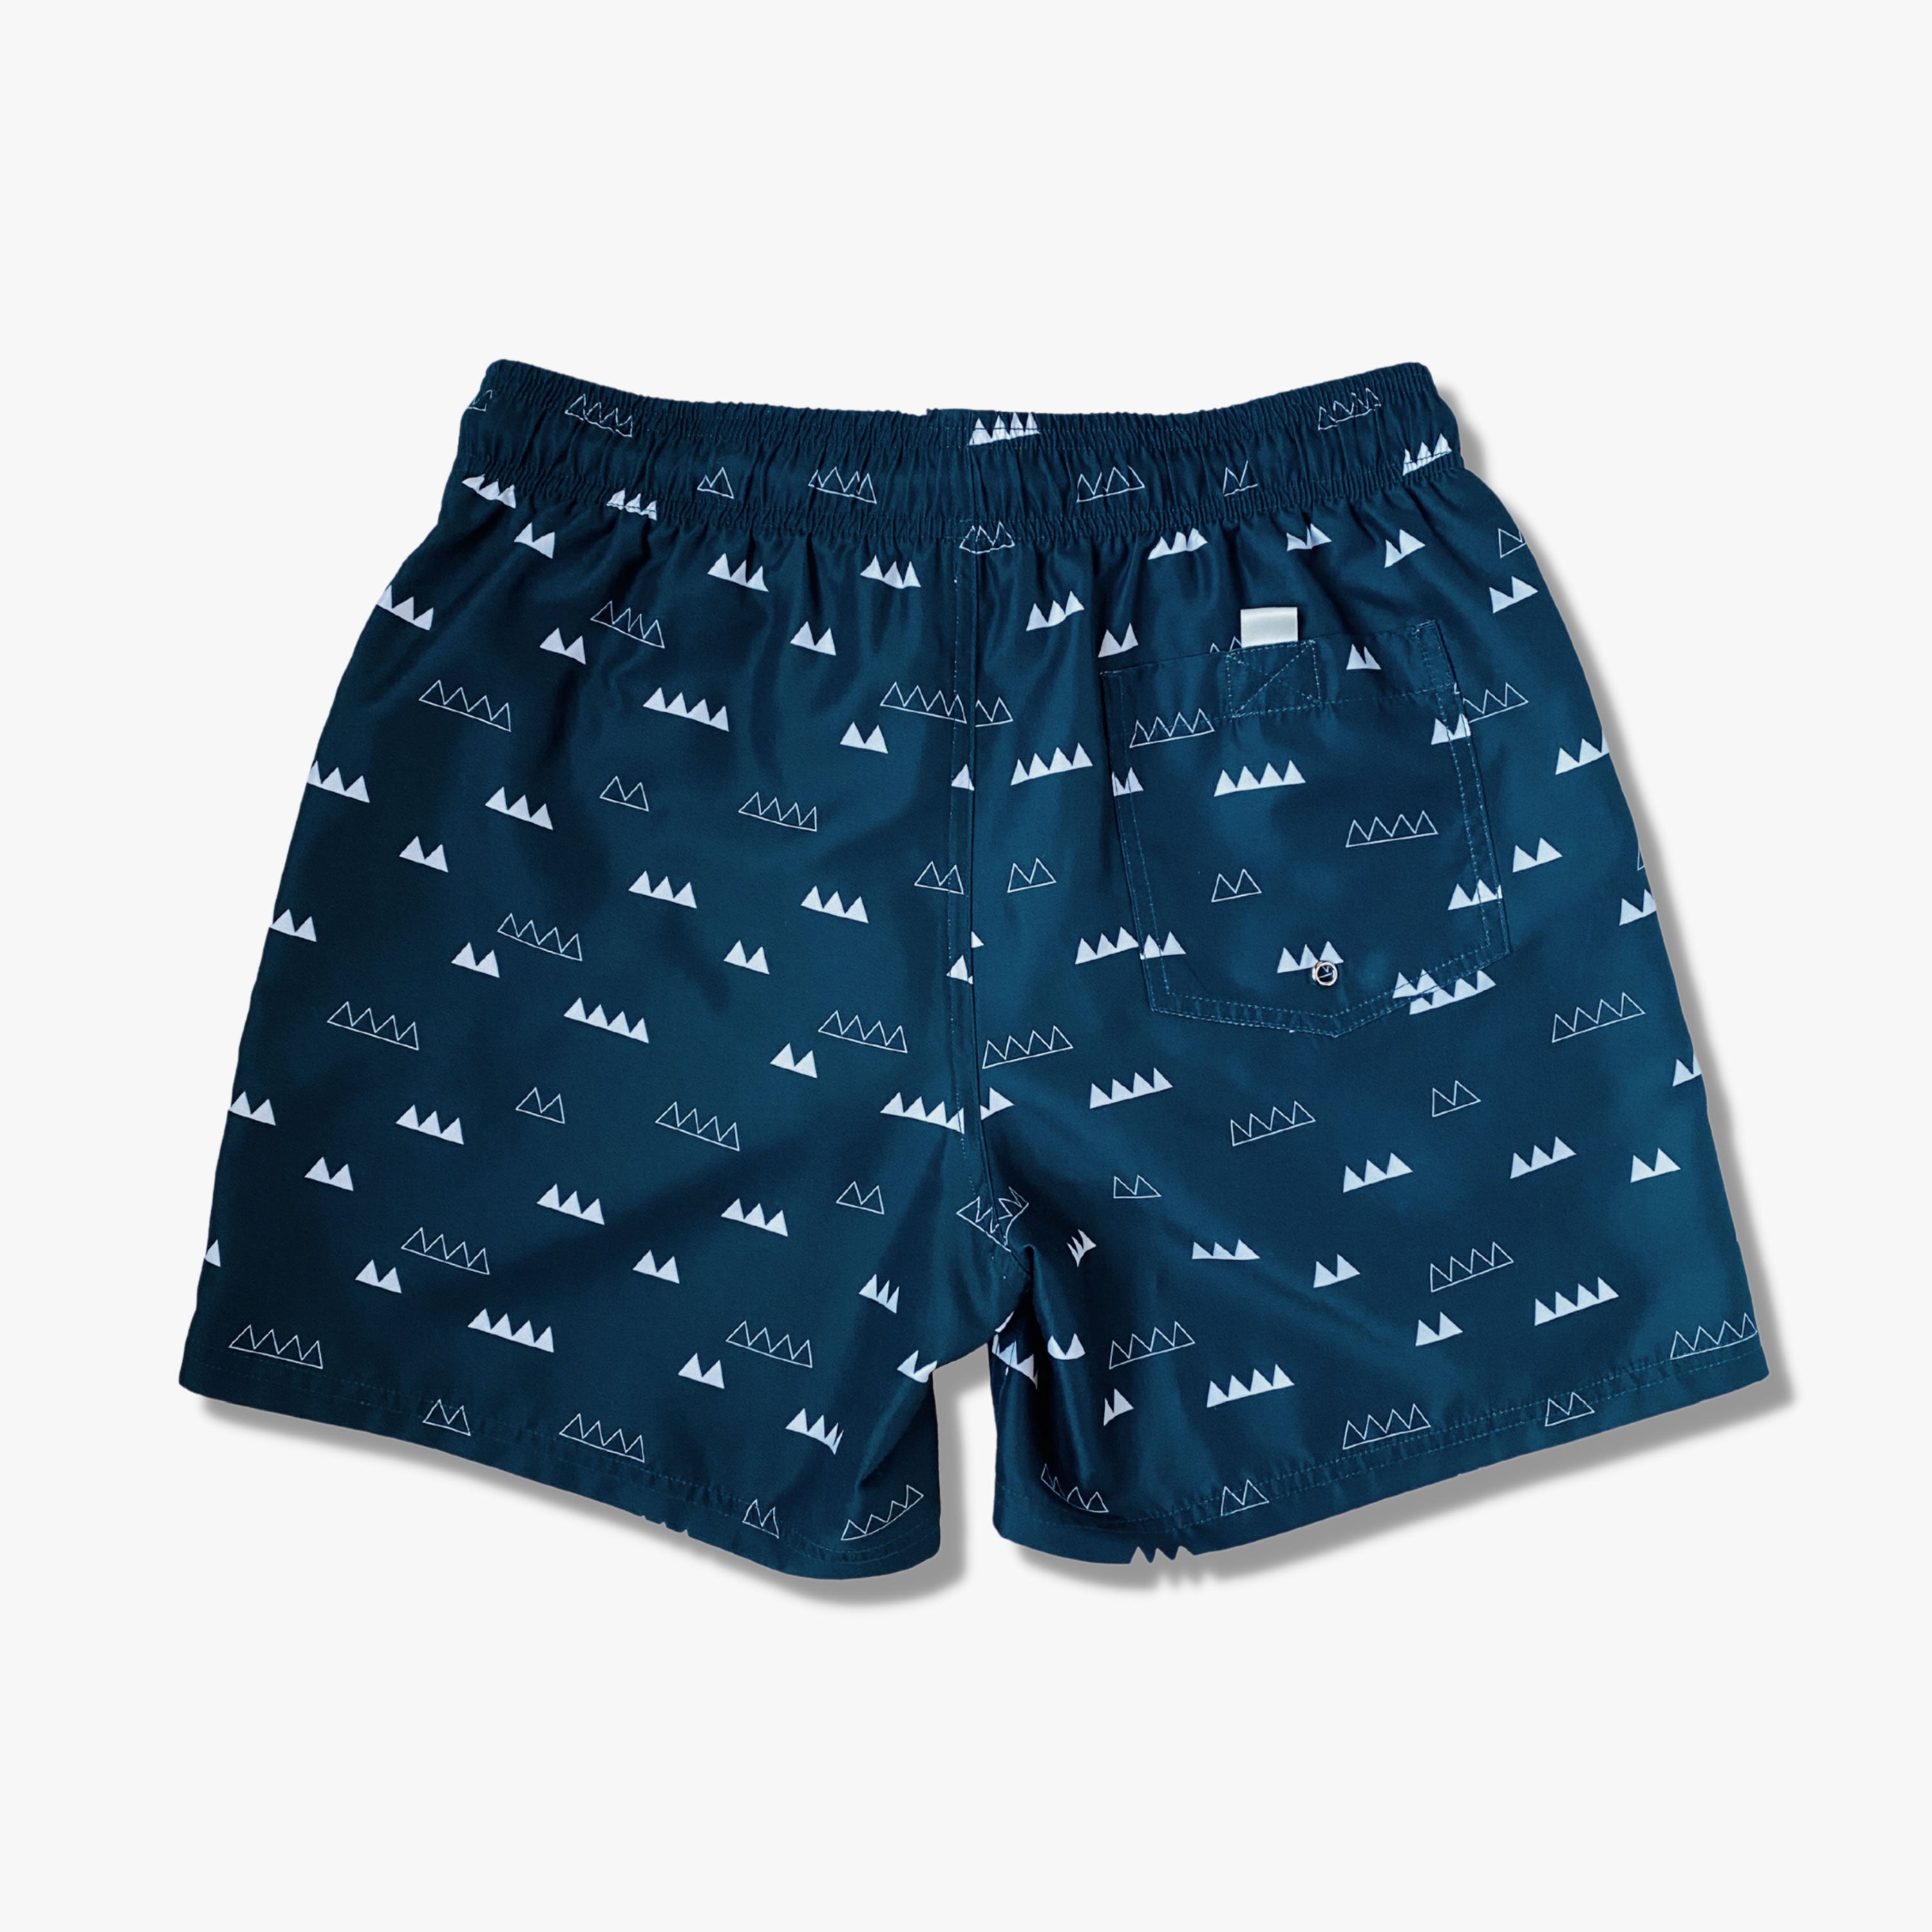 The Peaks and Valleys Swim Shorts